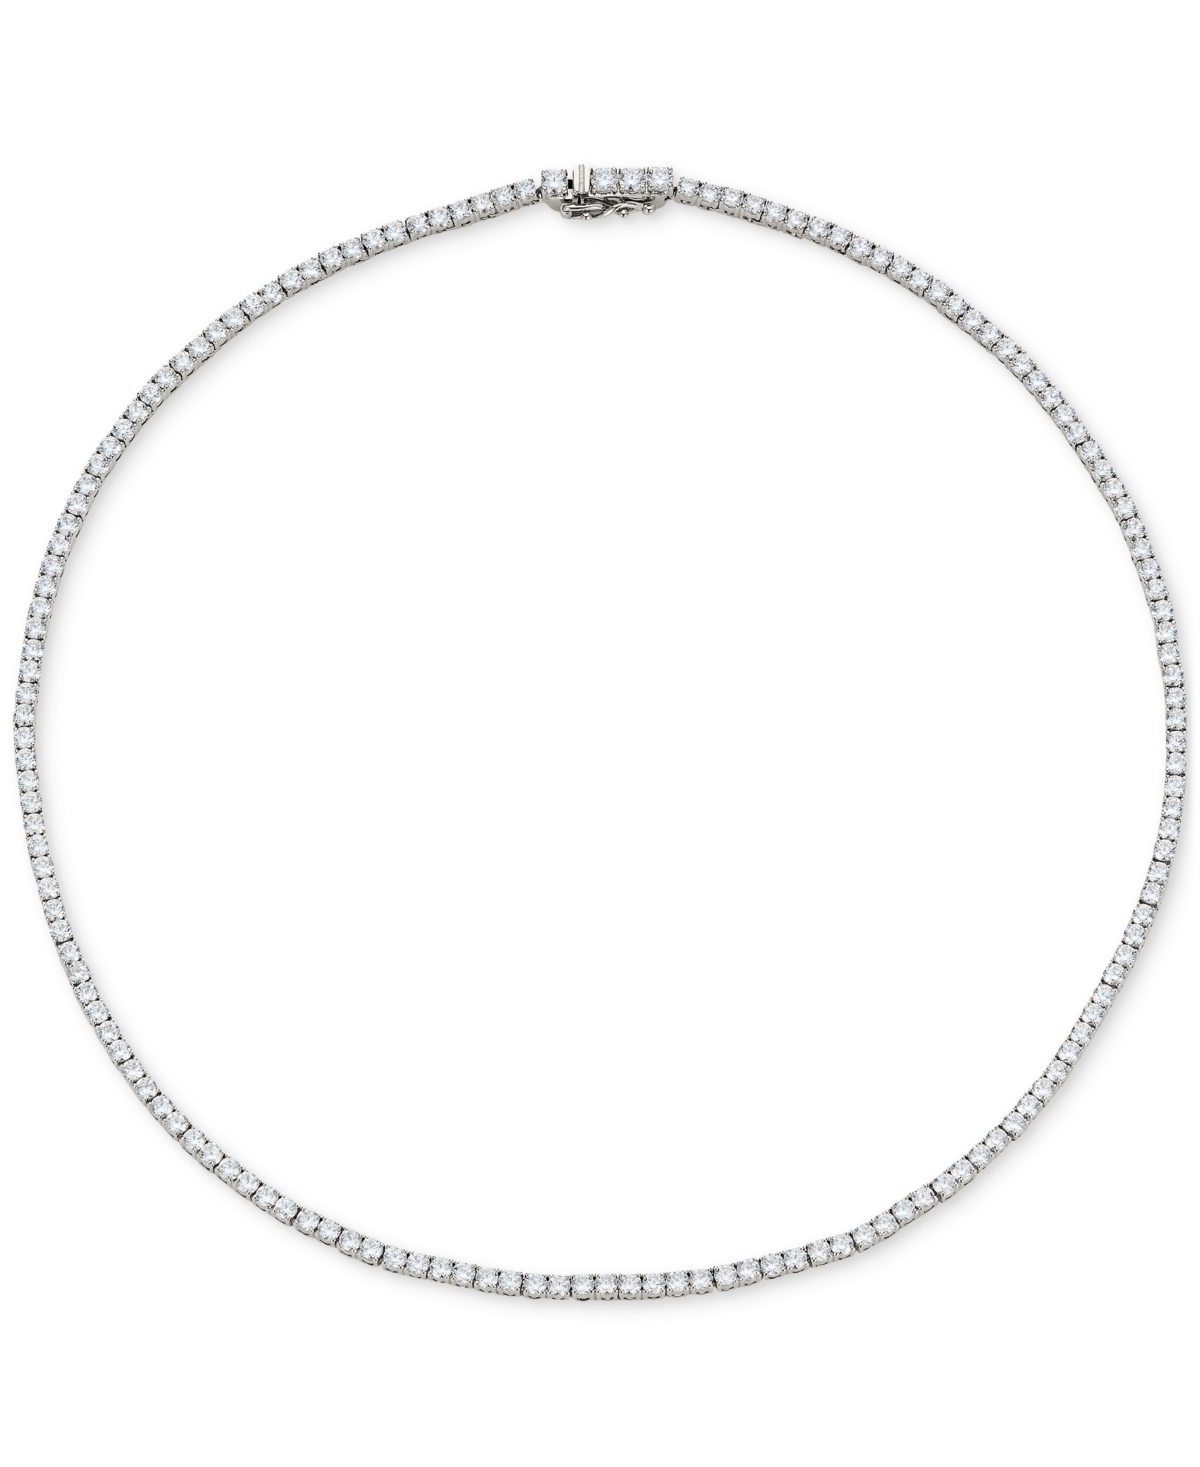 Rhodium-Plated Cubic Zirconia 16" Tennis Necklace, Created for Macy's - Rhodium